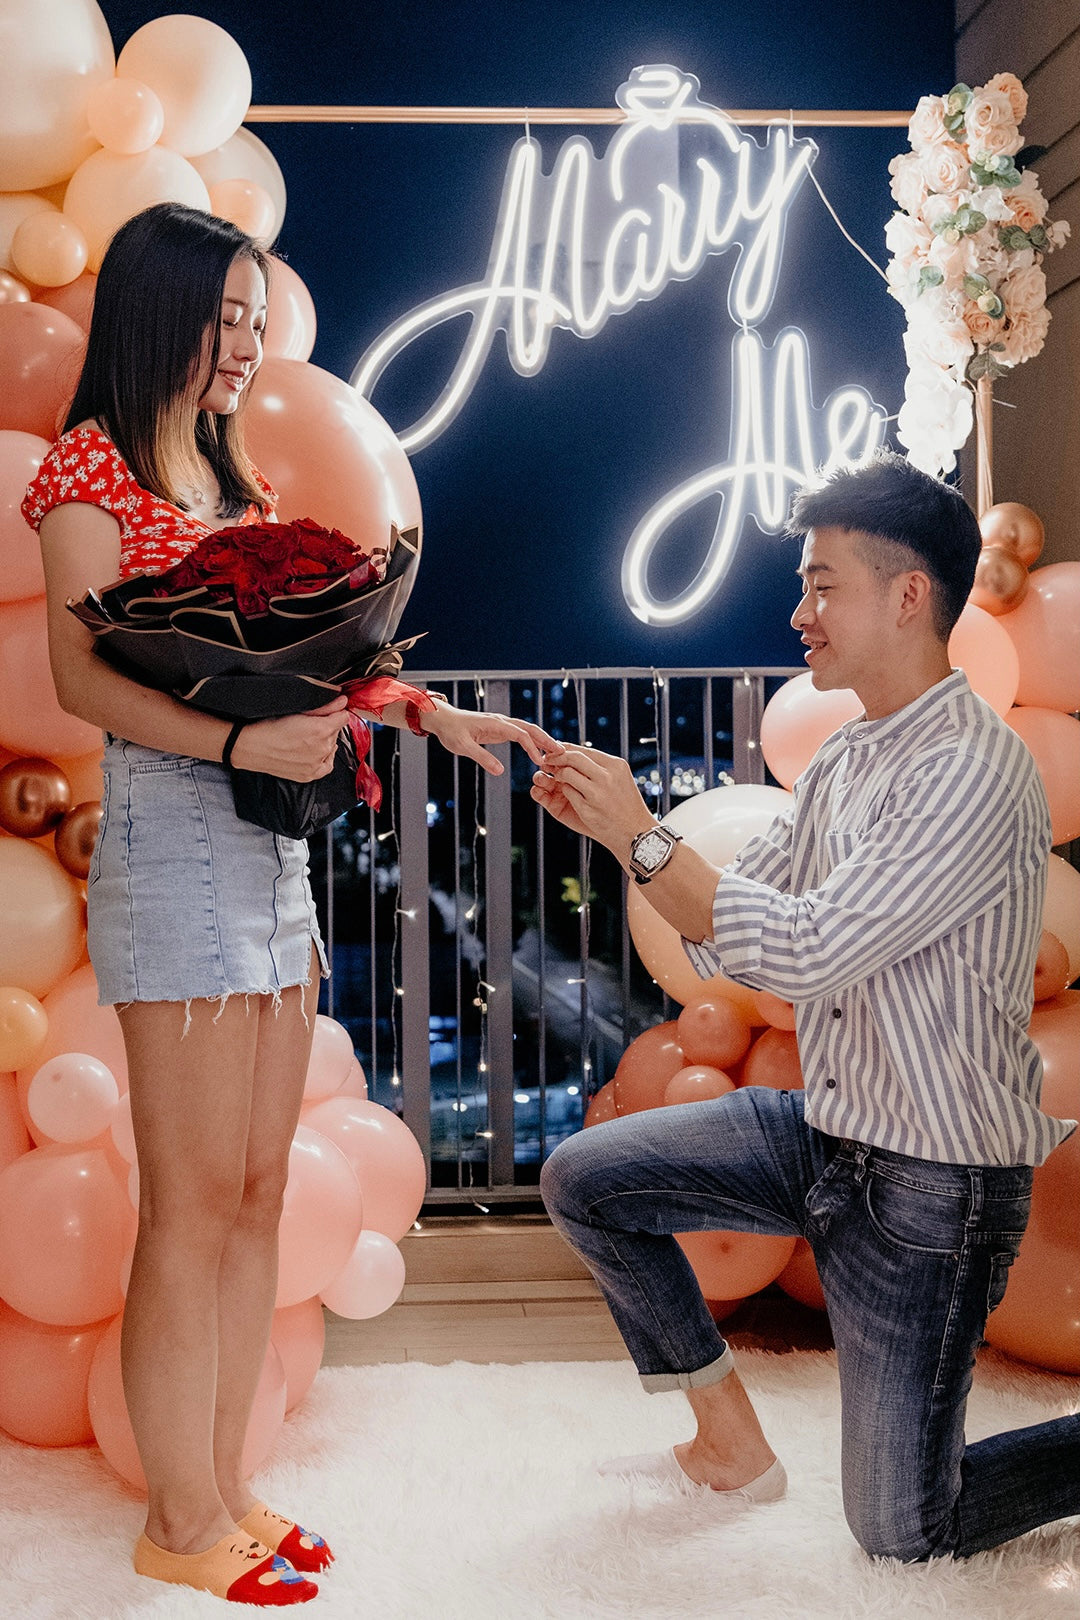 Romantic Home Proposal in Singapore with Giant Heartshape Balloon Sculpture by Style It Simply